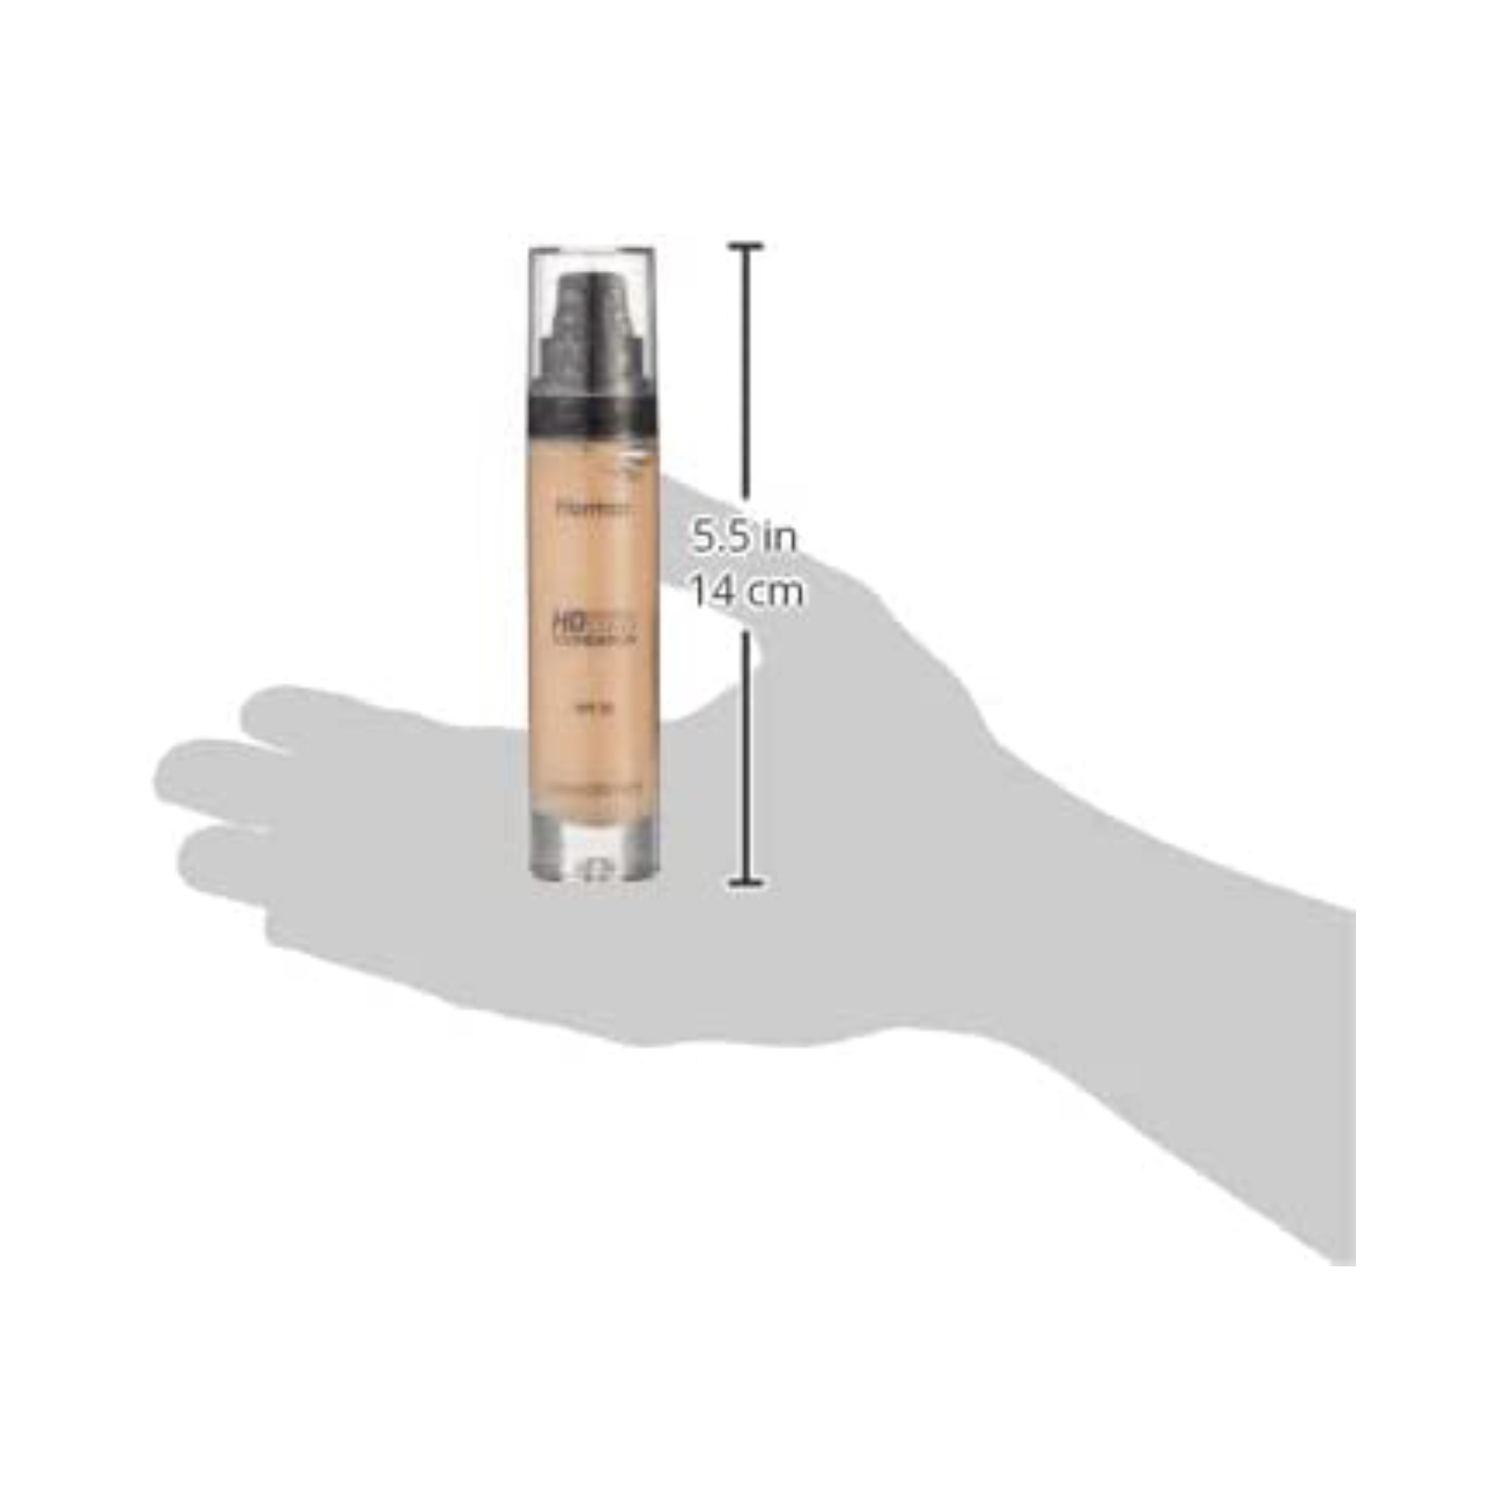 Flormar Invisible HD Cover Foundation Foundation 040 Light Ivory